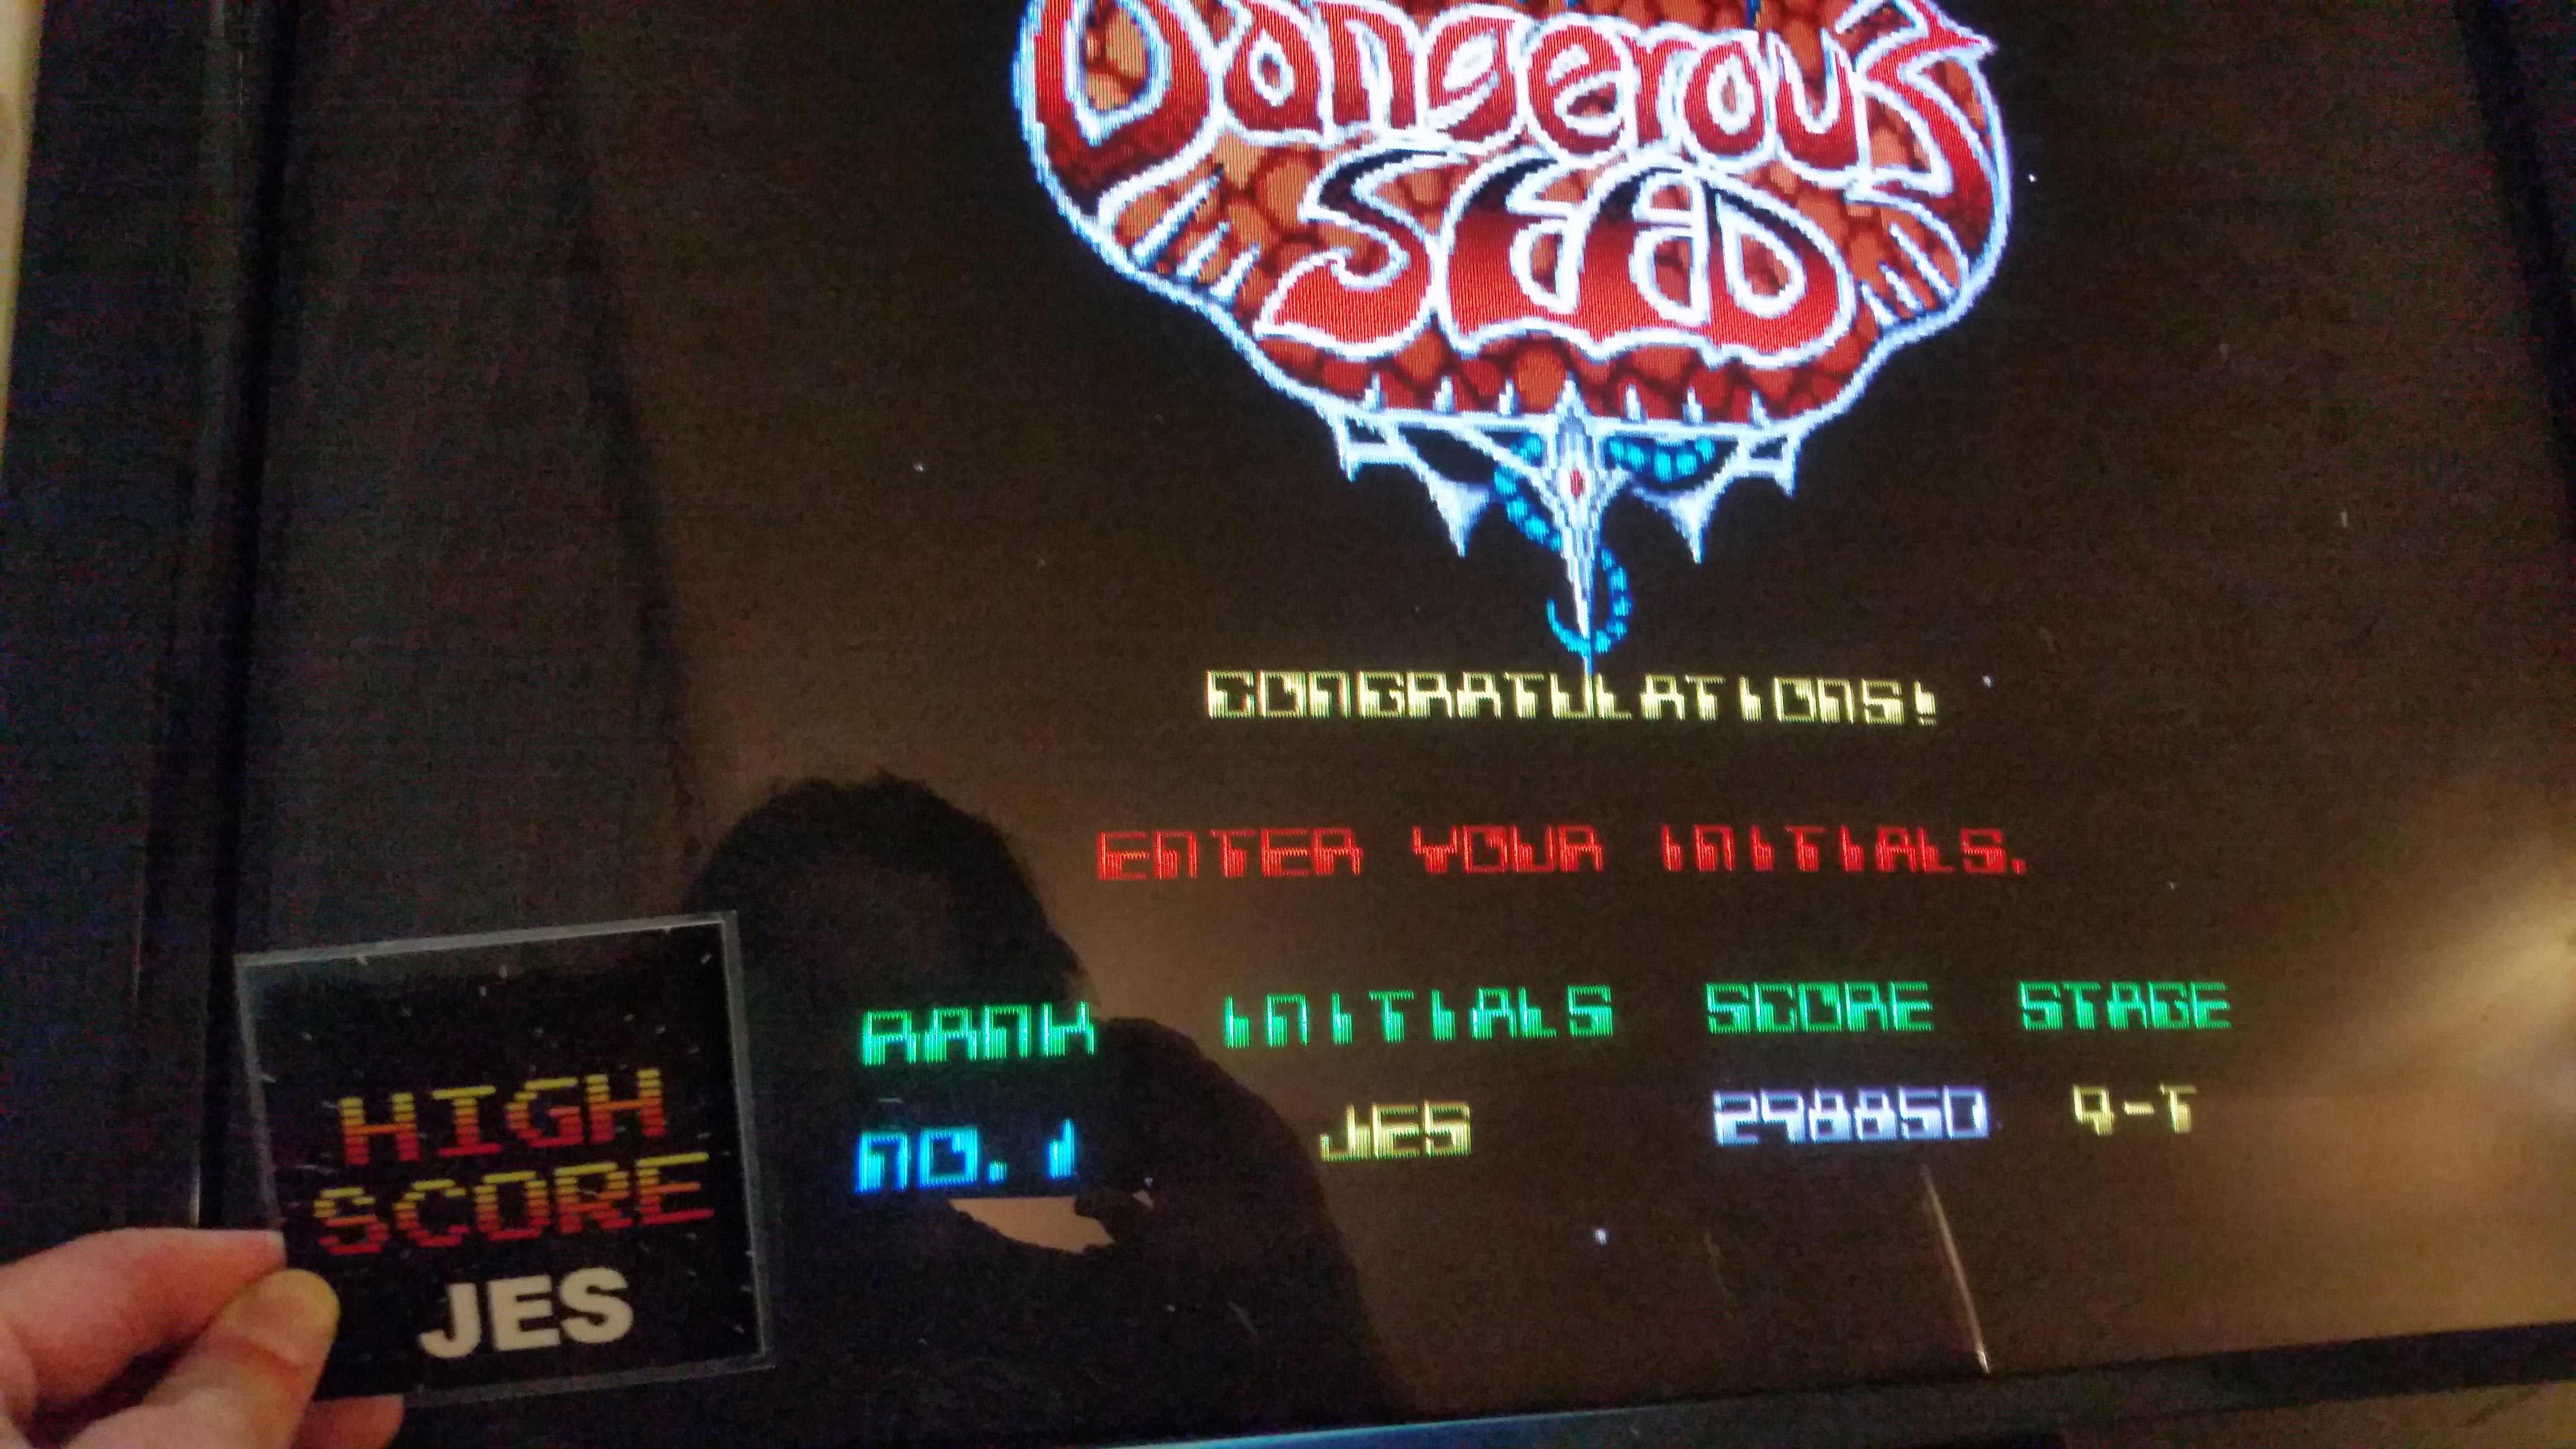 JES: Dangerous Seed [Japan] [dangseed] (Arcade Emulated / M.A.M.E.) 298,850 points on 2016-12-17 21:34:20